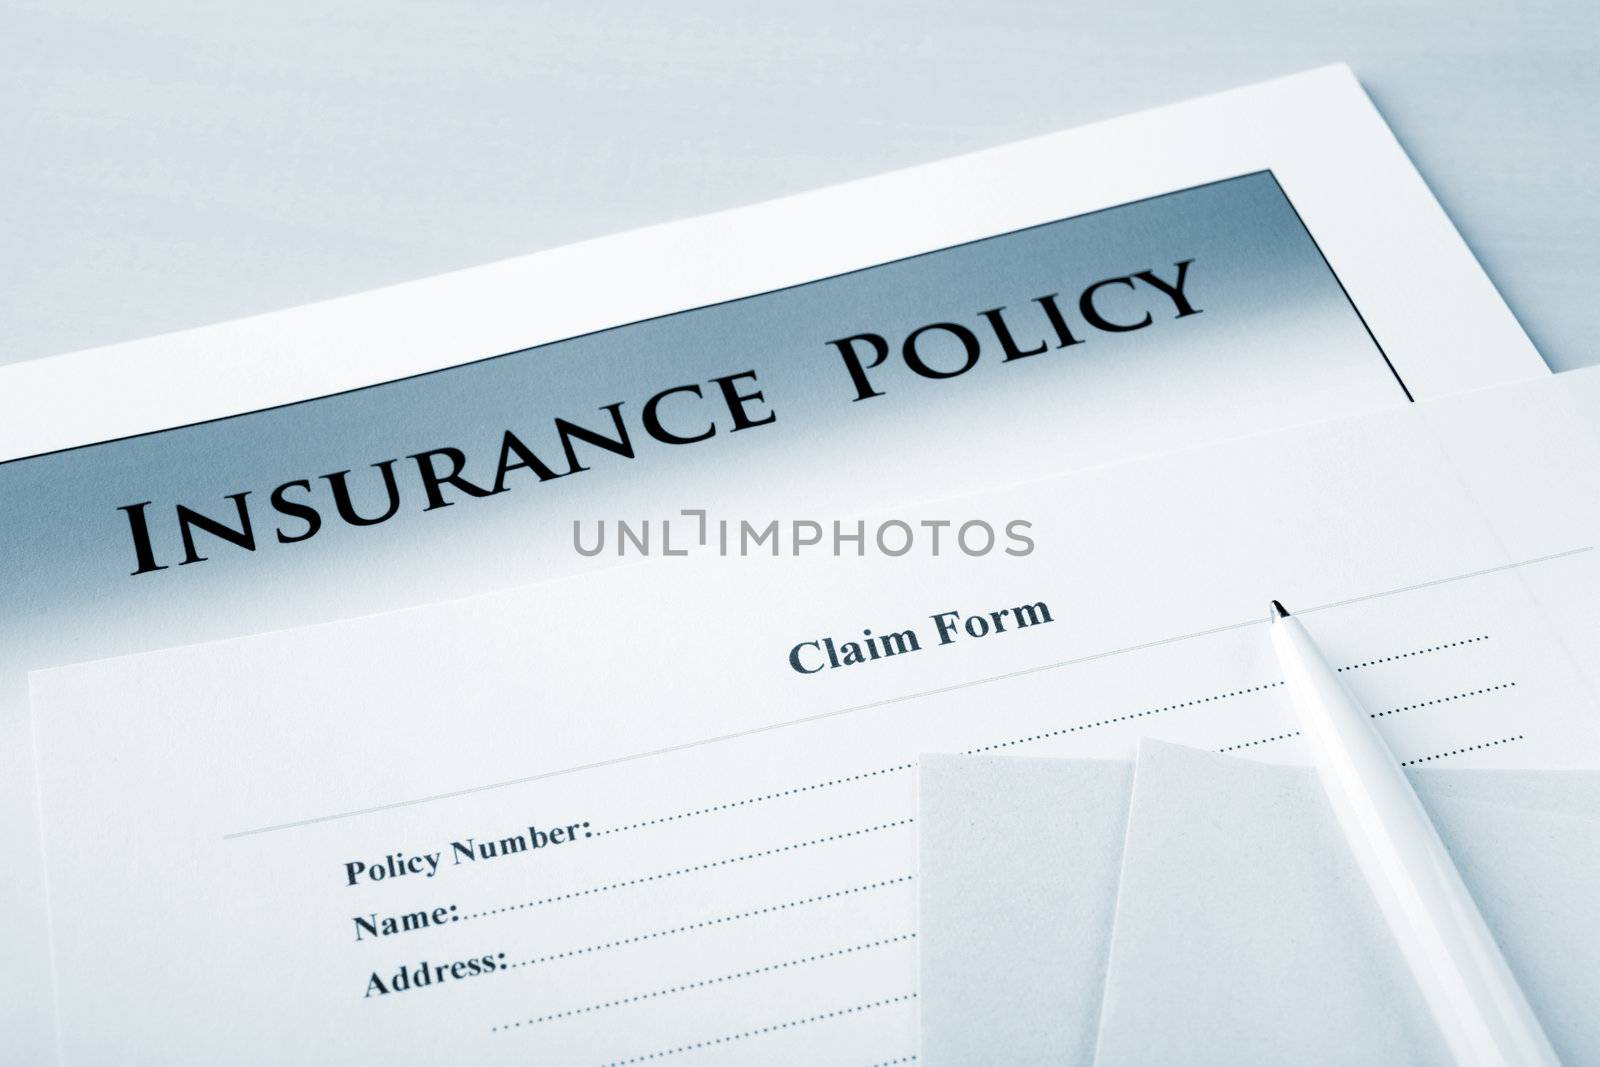 Insurance policy and claim form, focus on words "claim form".